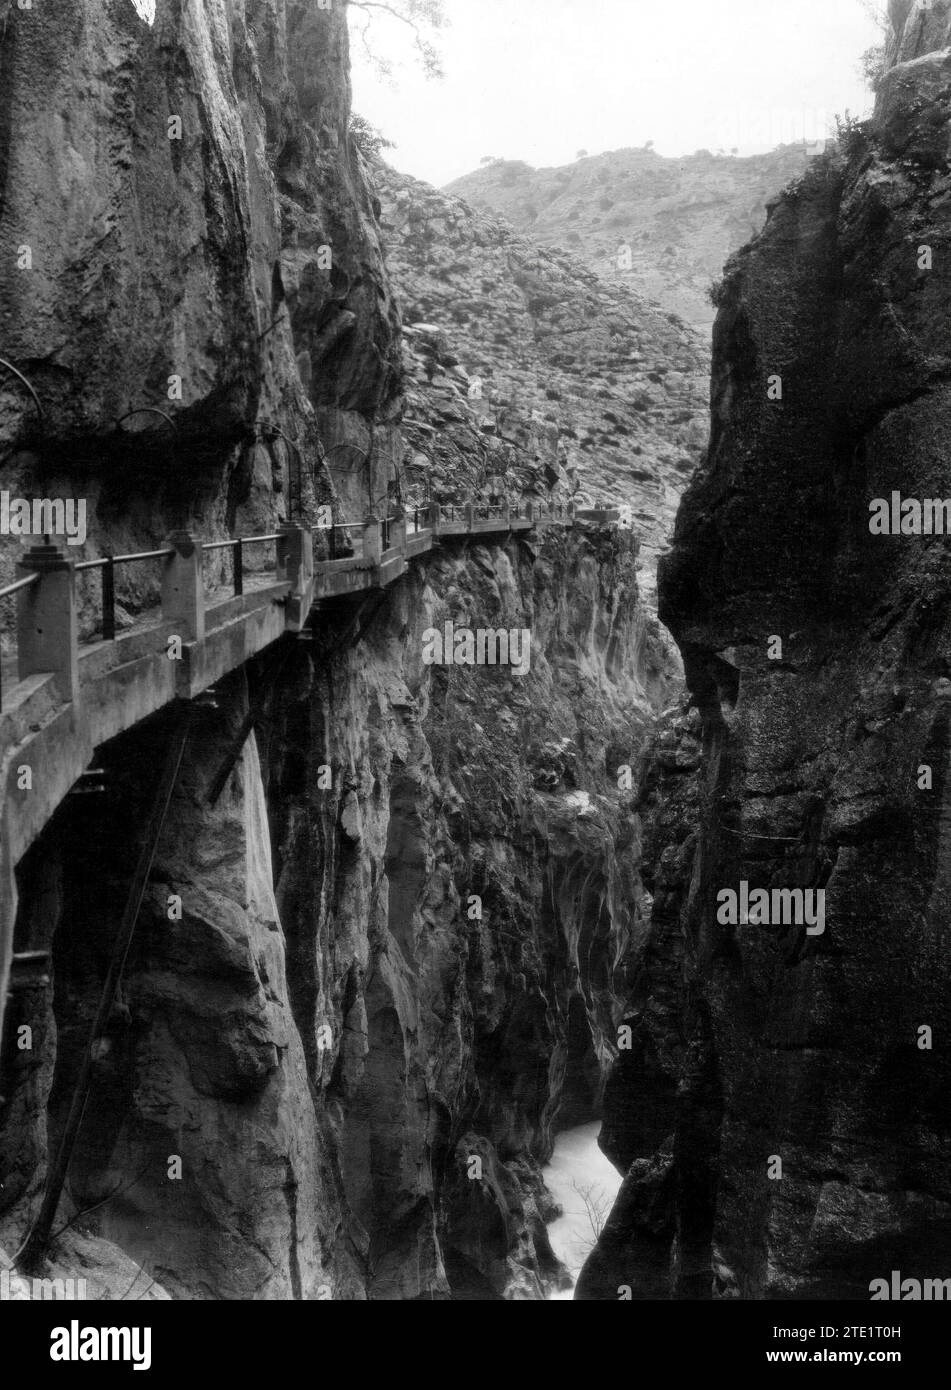 12/31/1924. Gitanes Gorge (Málaga). The gorge runs between the municipalities of Ardales, Álora and Antequera, next to the village and the El Chorro reservoir. There is a three-kilometer-long path that was built for maintenance workers to access the El Chorro reservoir, hanging from the walls of the gorge. King Alfonso XIII visited it in 1921 and since then it began to be known as Caminito del Rey. Credit: Album / Archivo ABC / Carlos Aguilera Bazán Stock Photo